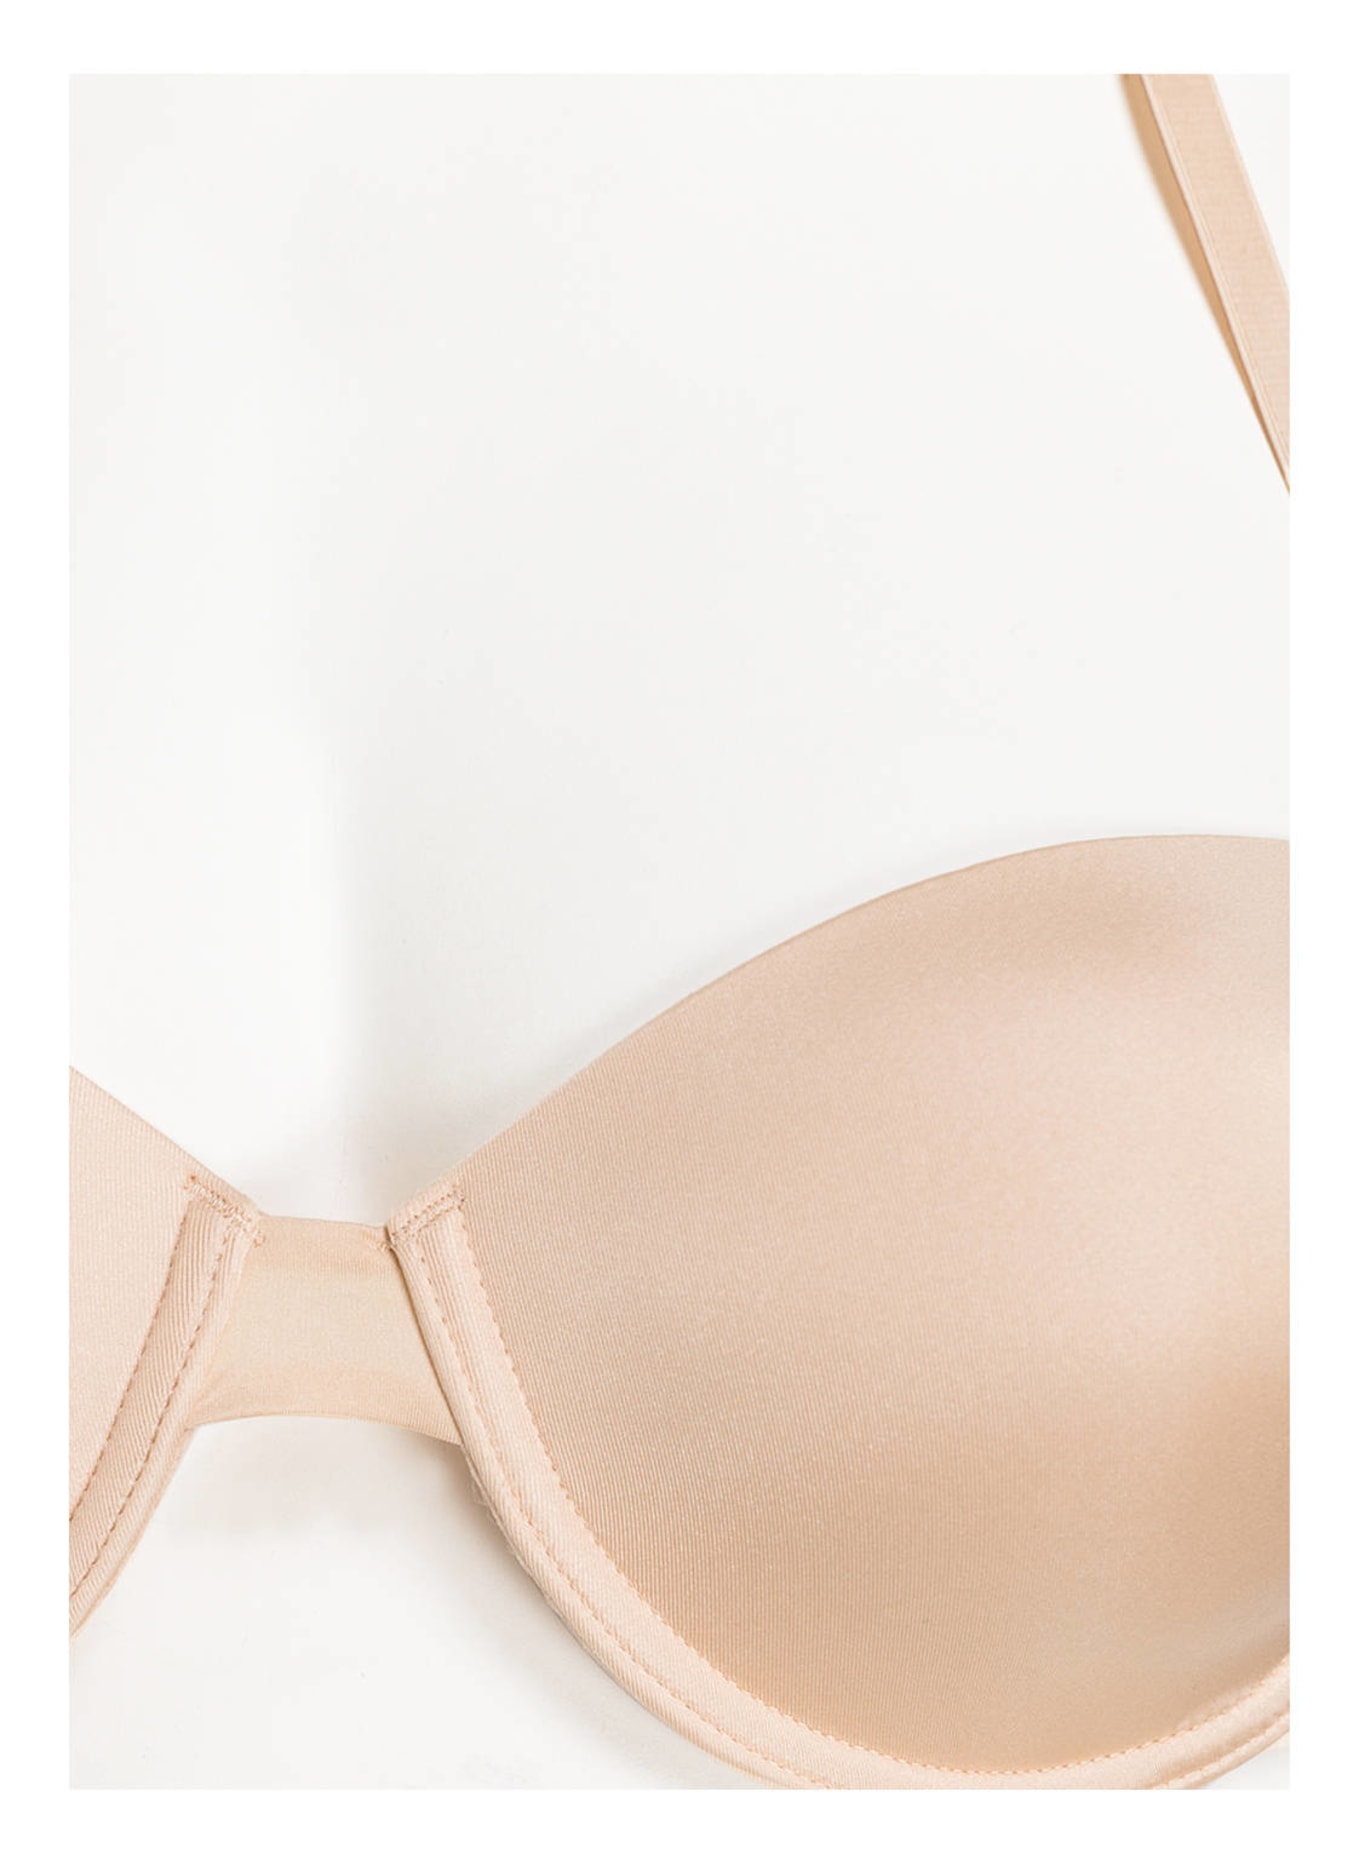 MAGIC Bodyfashion Multiway bra MAGICAL STRAPLESS, Color: BEIGE (Image 5)